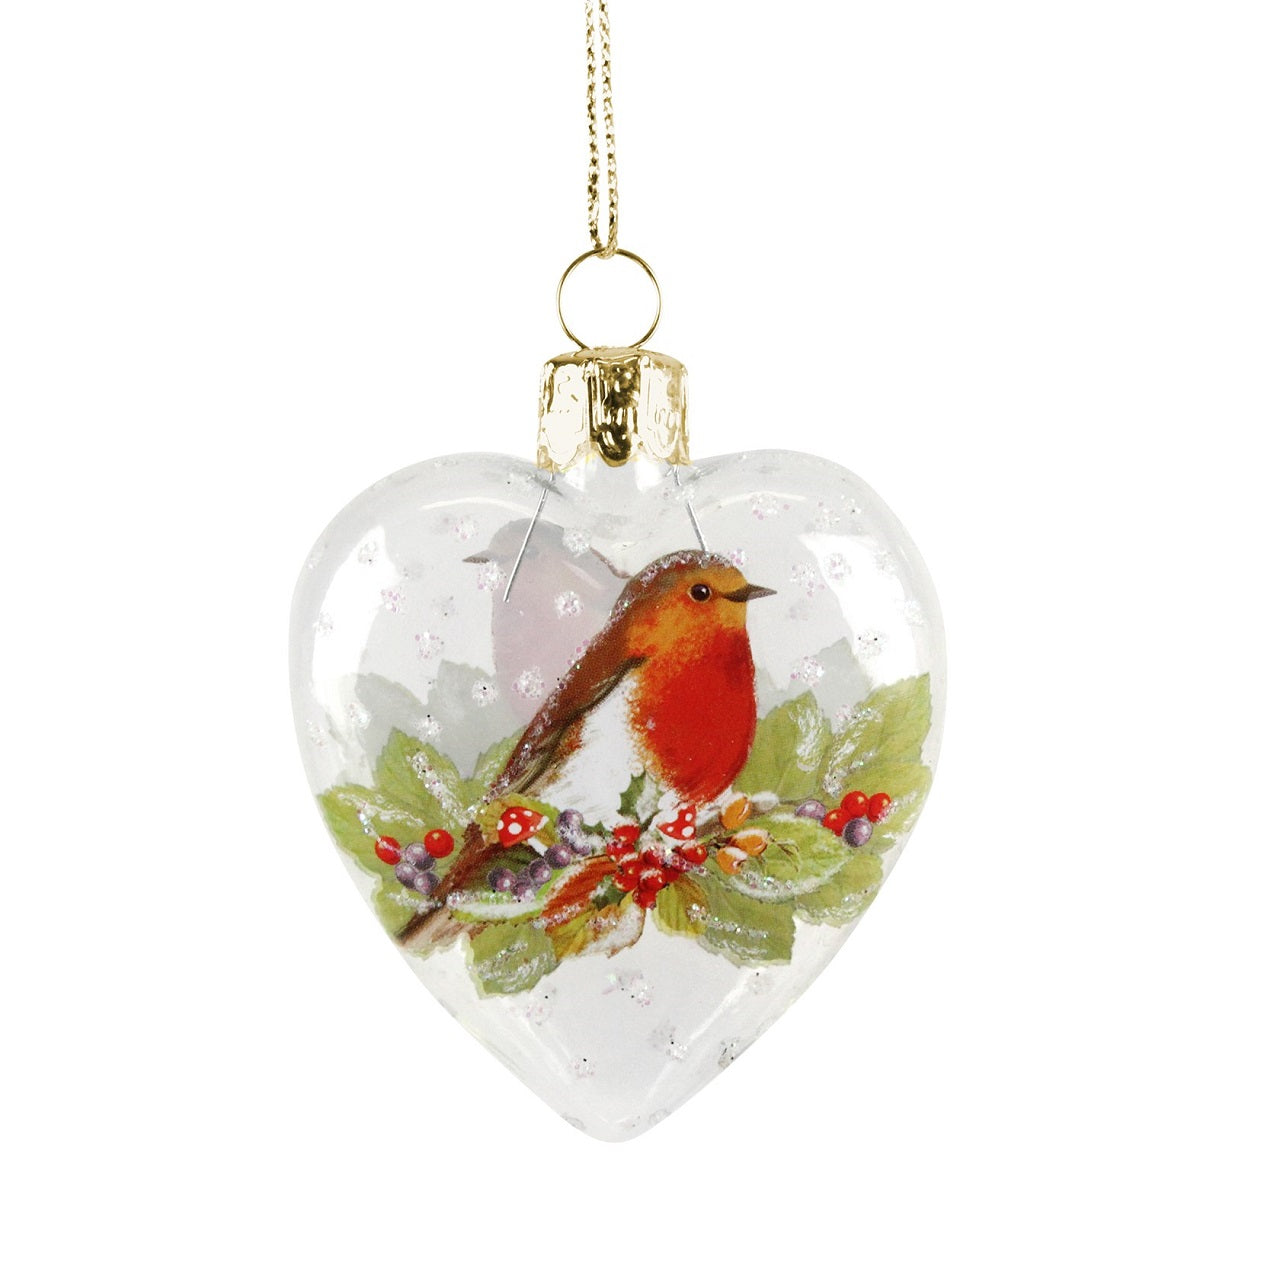 Gisela Graham Heart-Shaped Bauble with Robin Christmas Decoration  Browse our beautiful range of luxury Christmas tree decorations and ornaments for your tree this Christmas.  Add style to your Christmas tree with this beautiful heart-shaped glass bauble decorated with a robin Christmas hanging ornament.